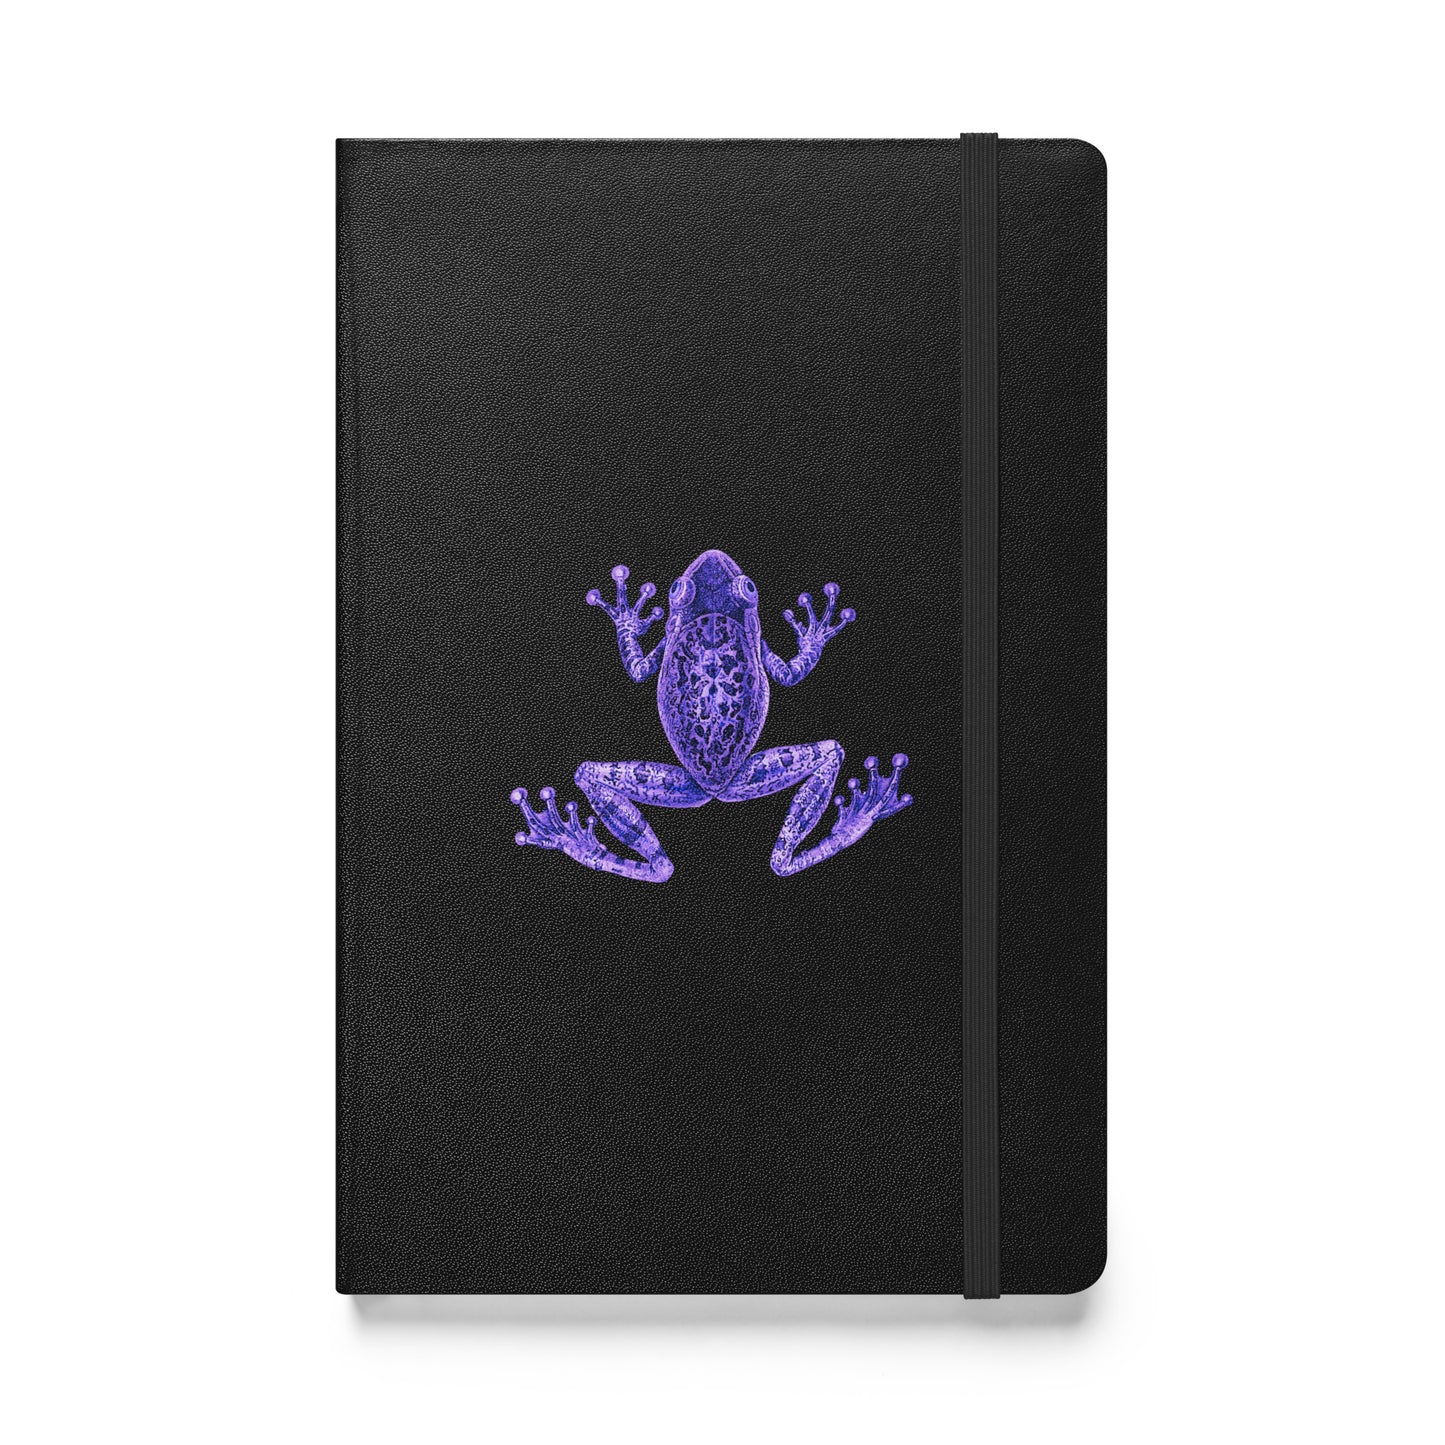 Hardcover Bound Notebook: Purple Neon Frog 5.5" × 8.5" Writing Journal Lined Cream 80 Pages Elastic Closure & Ribbon Marker Expandable Inner Pocket